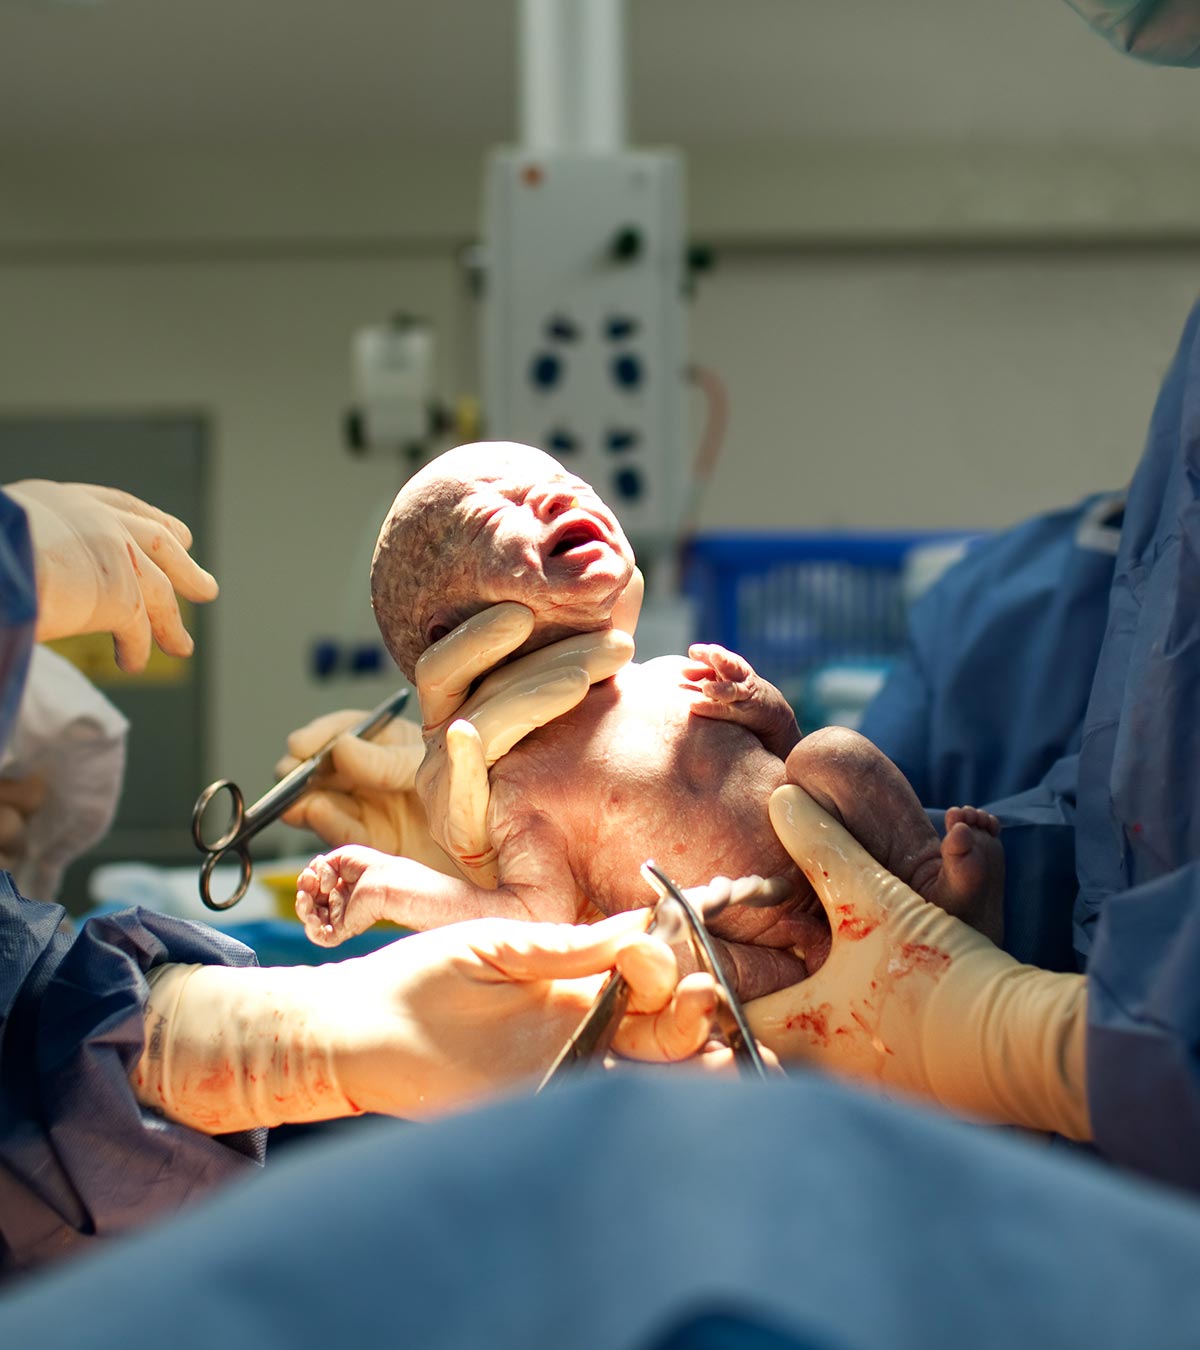 A 74-Year-Old Woman Has Given Birth To Twins. Here's How That's Possible